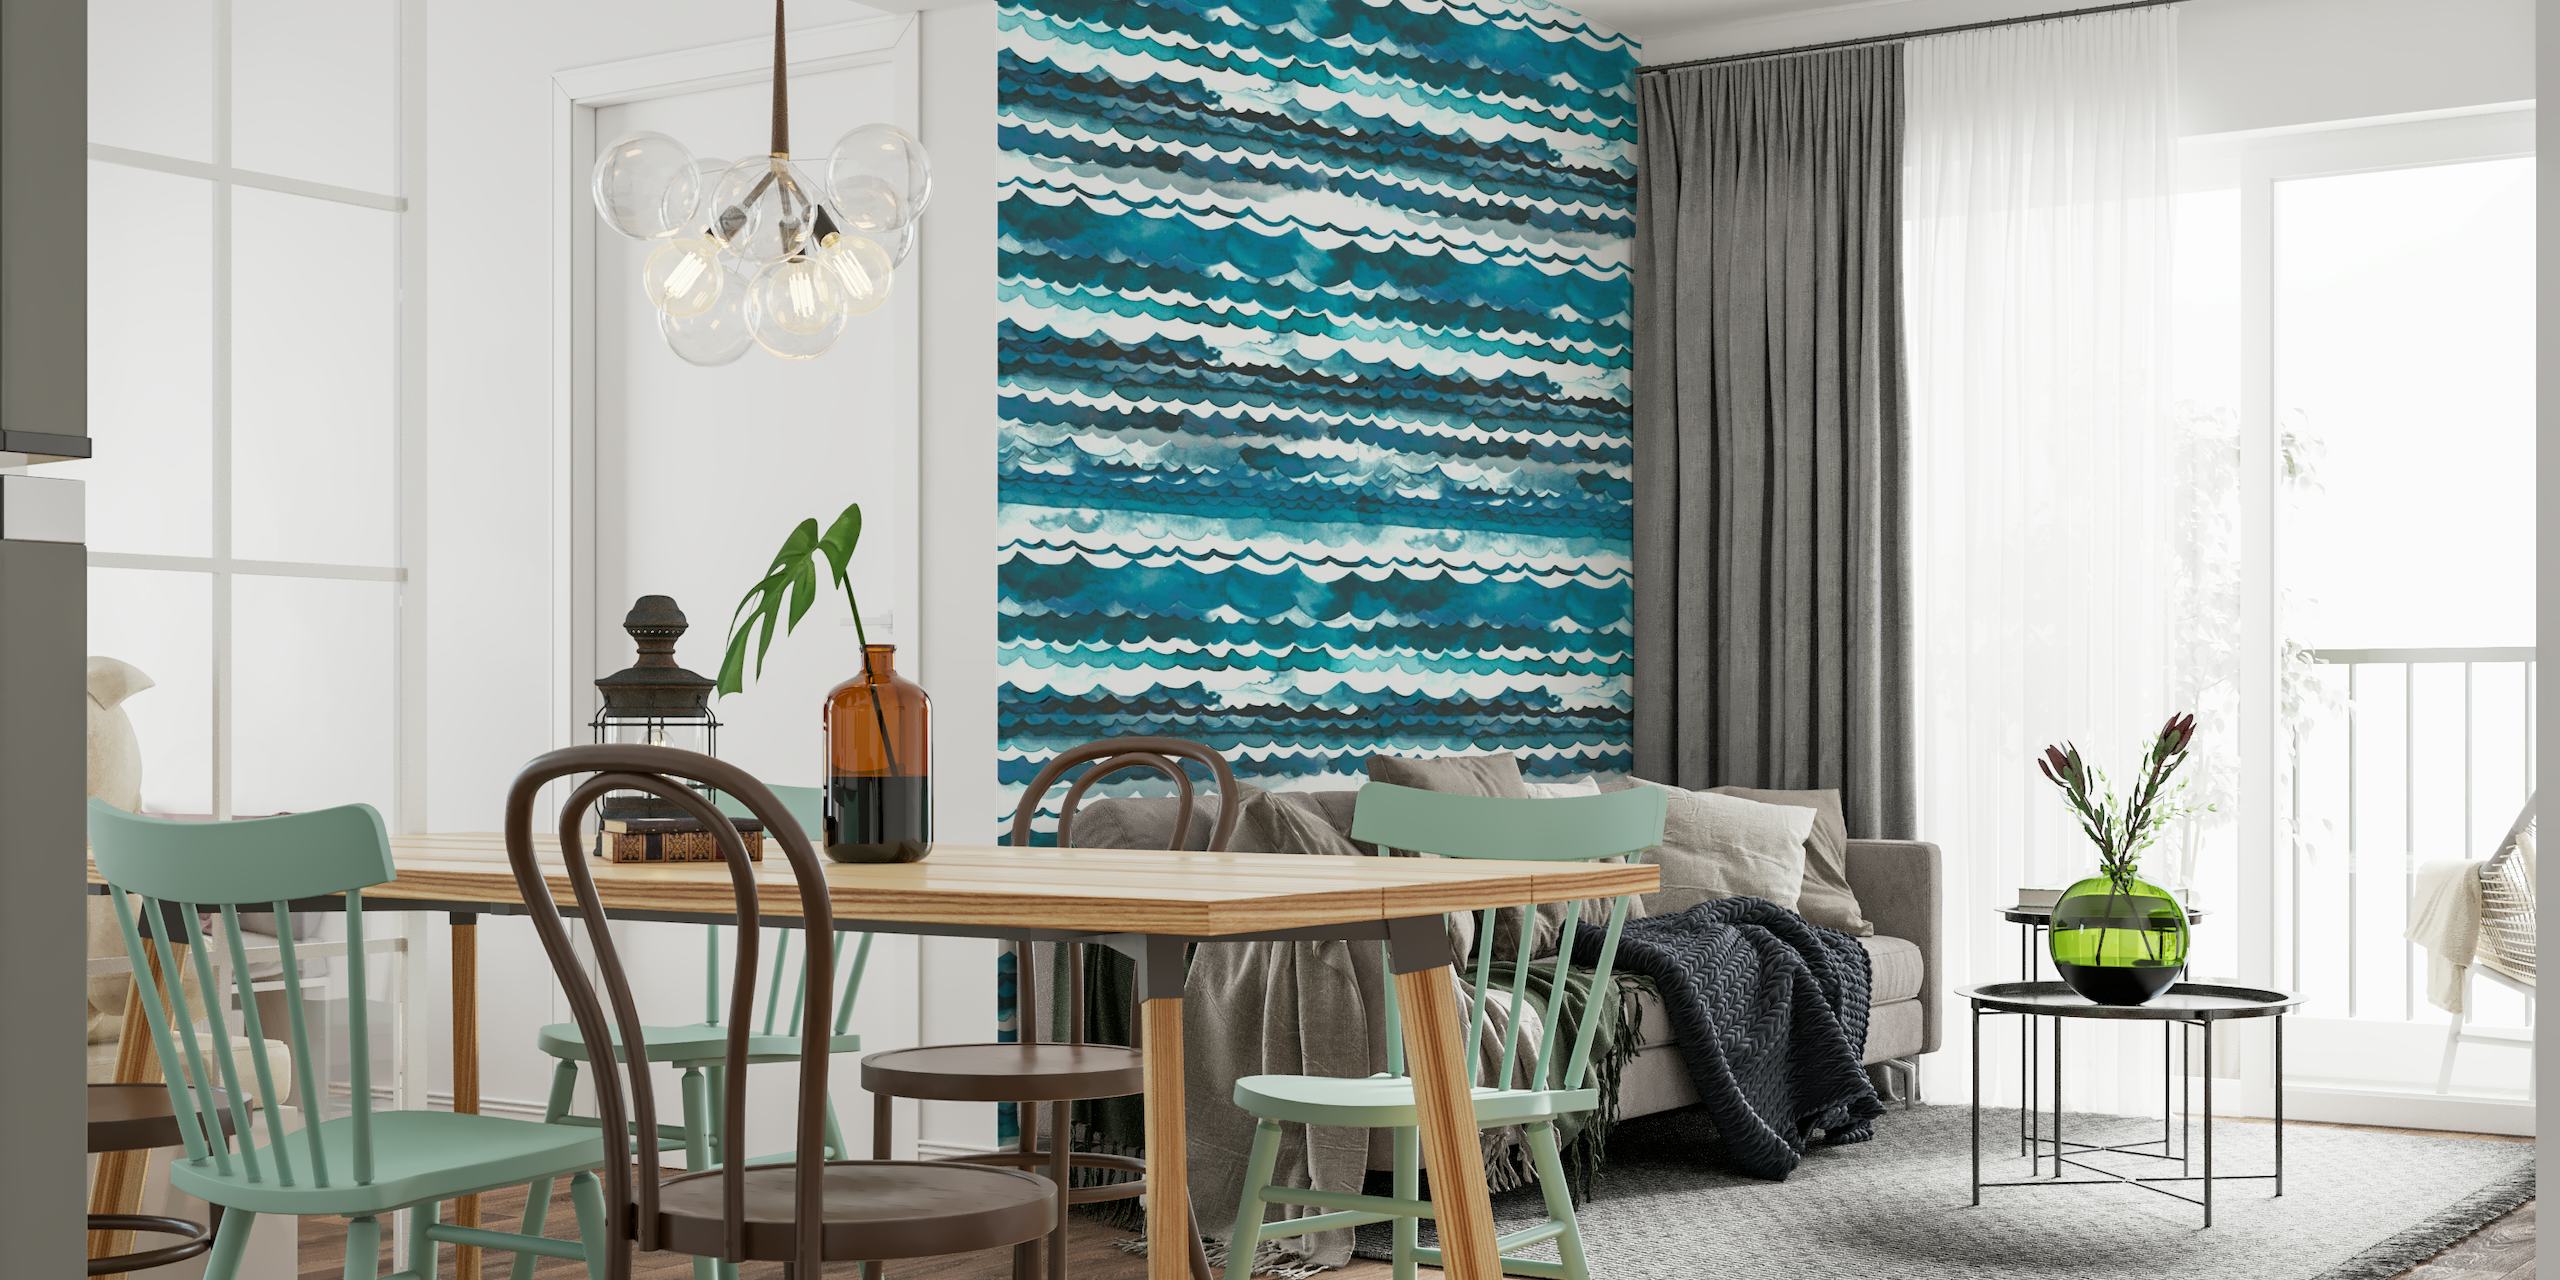 Abstract sea waves pattern in shades of blue and aqua for a wall mural